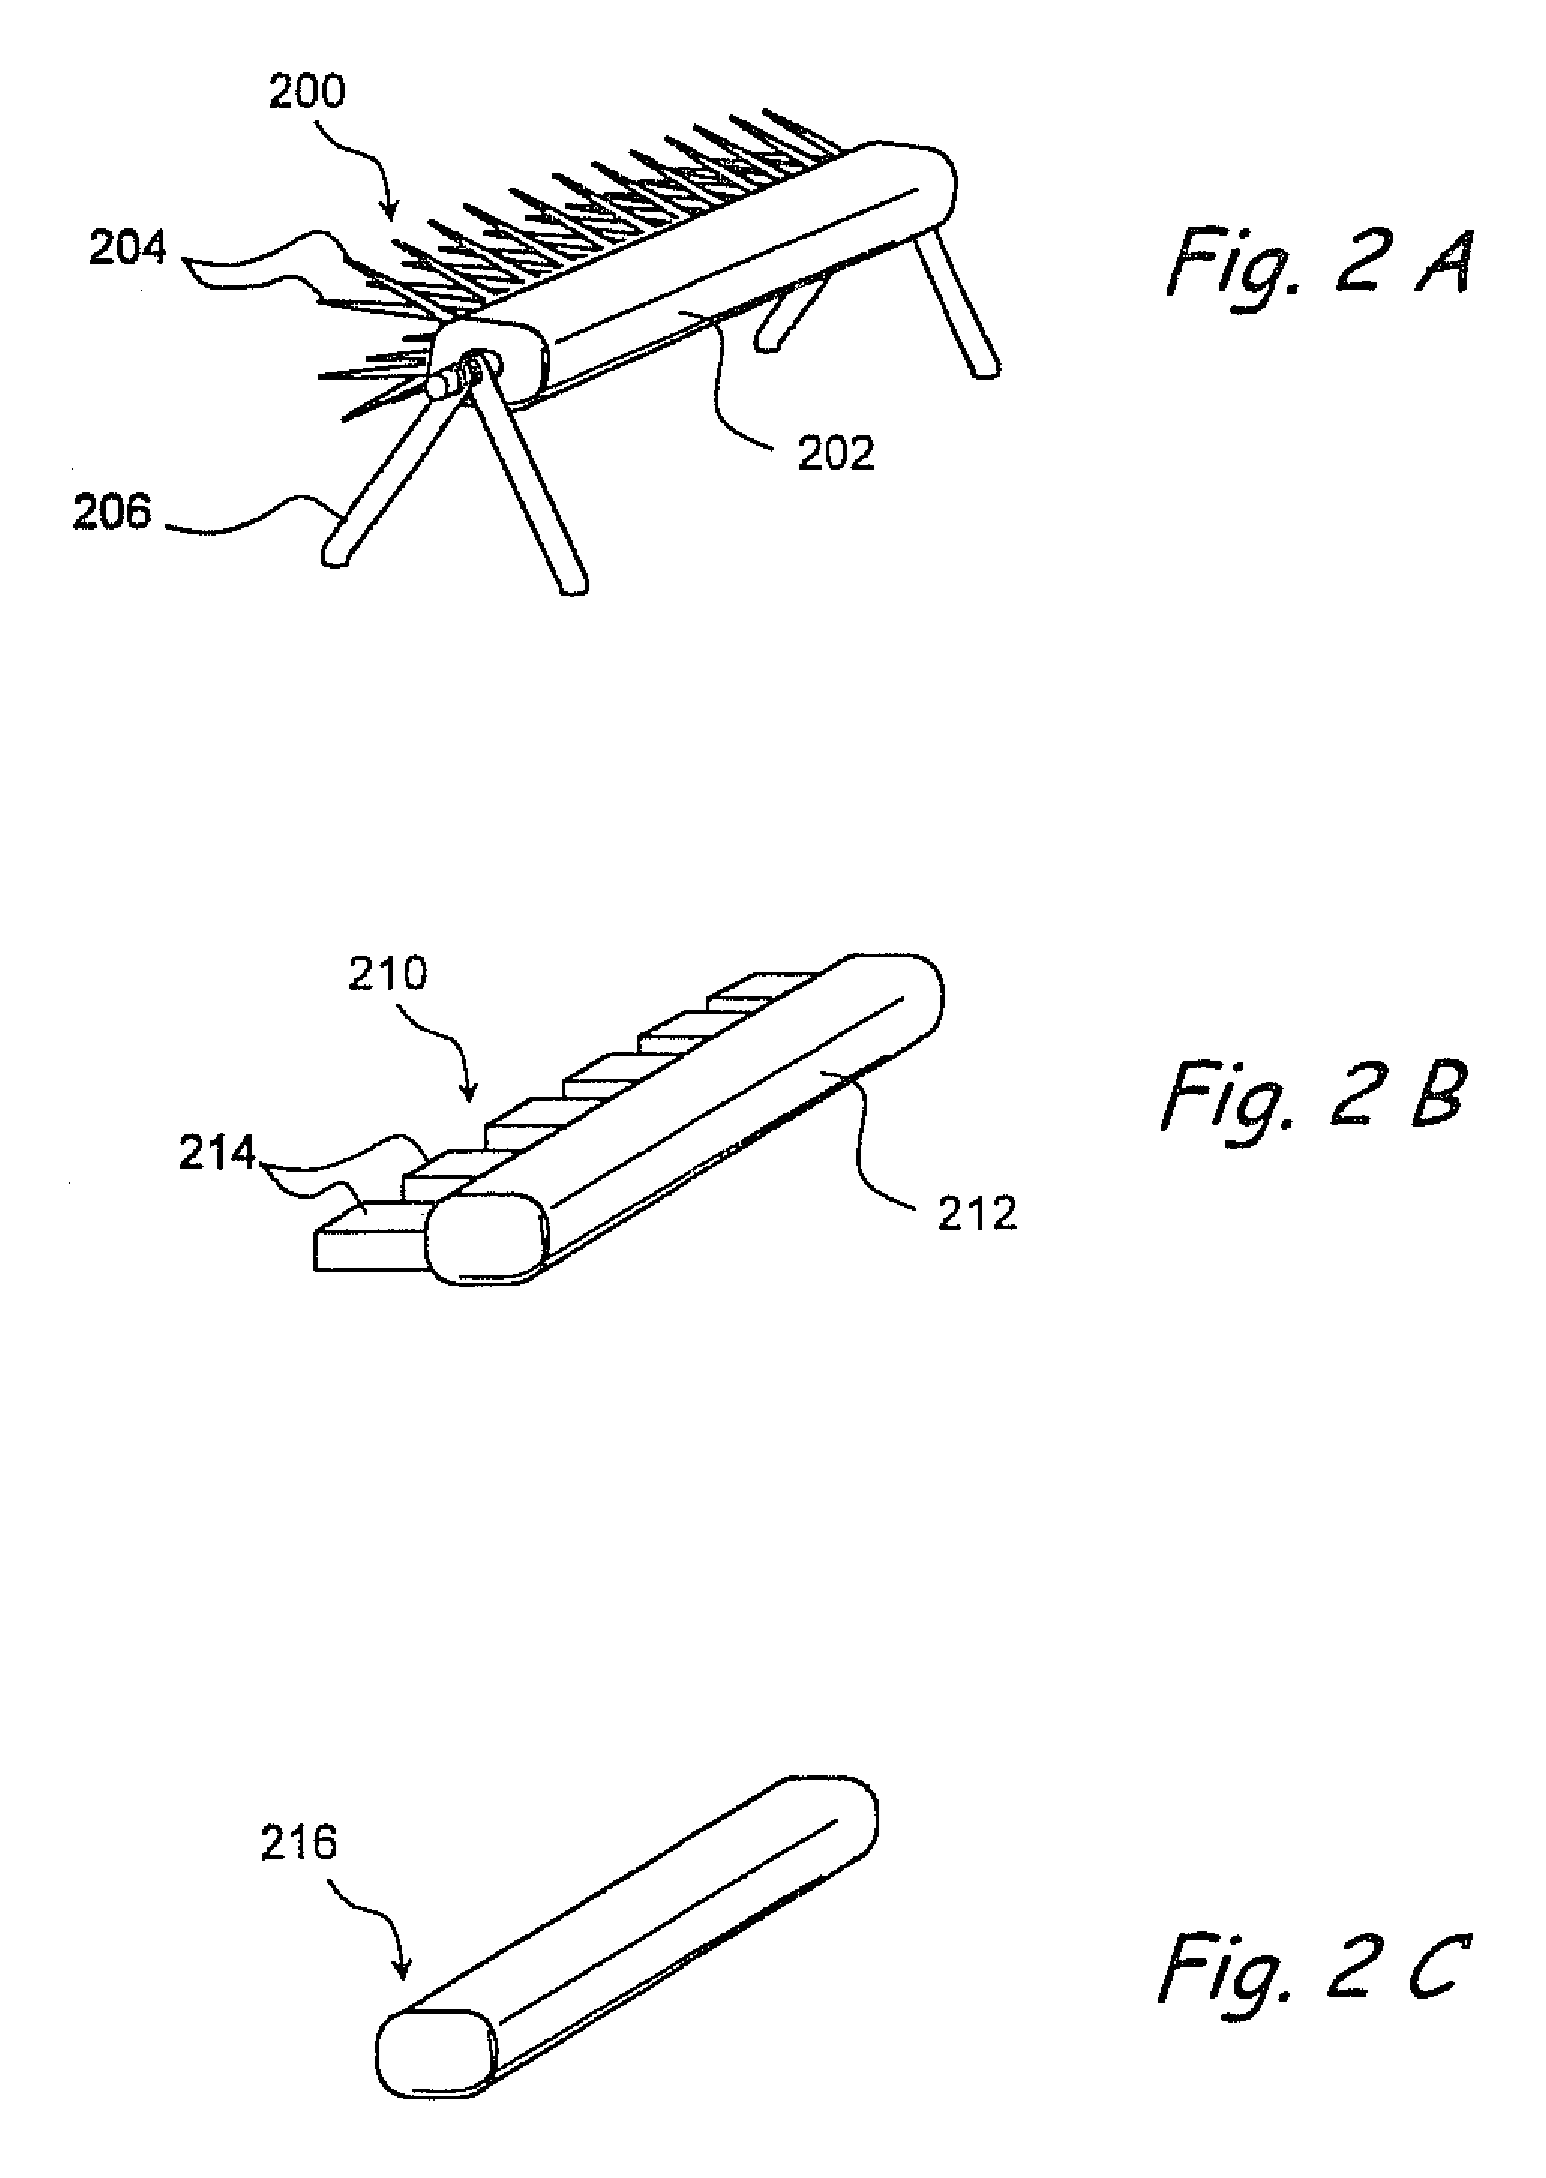 Methods and Apparatus for Treating Disorders of the Ear Nose and Throat